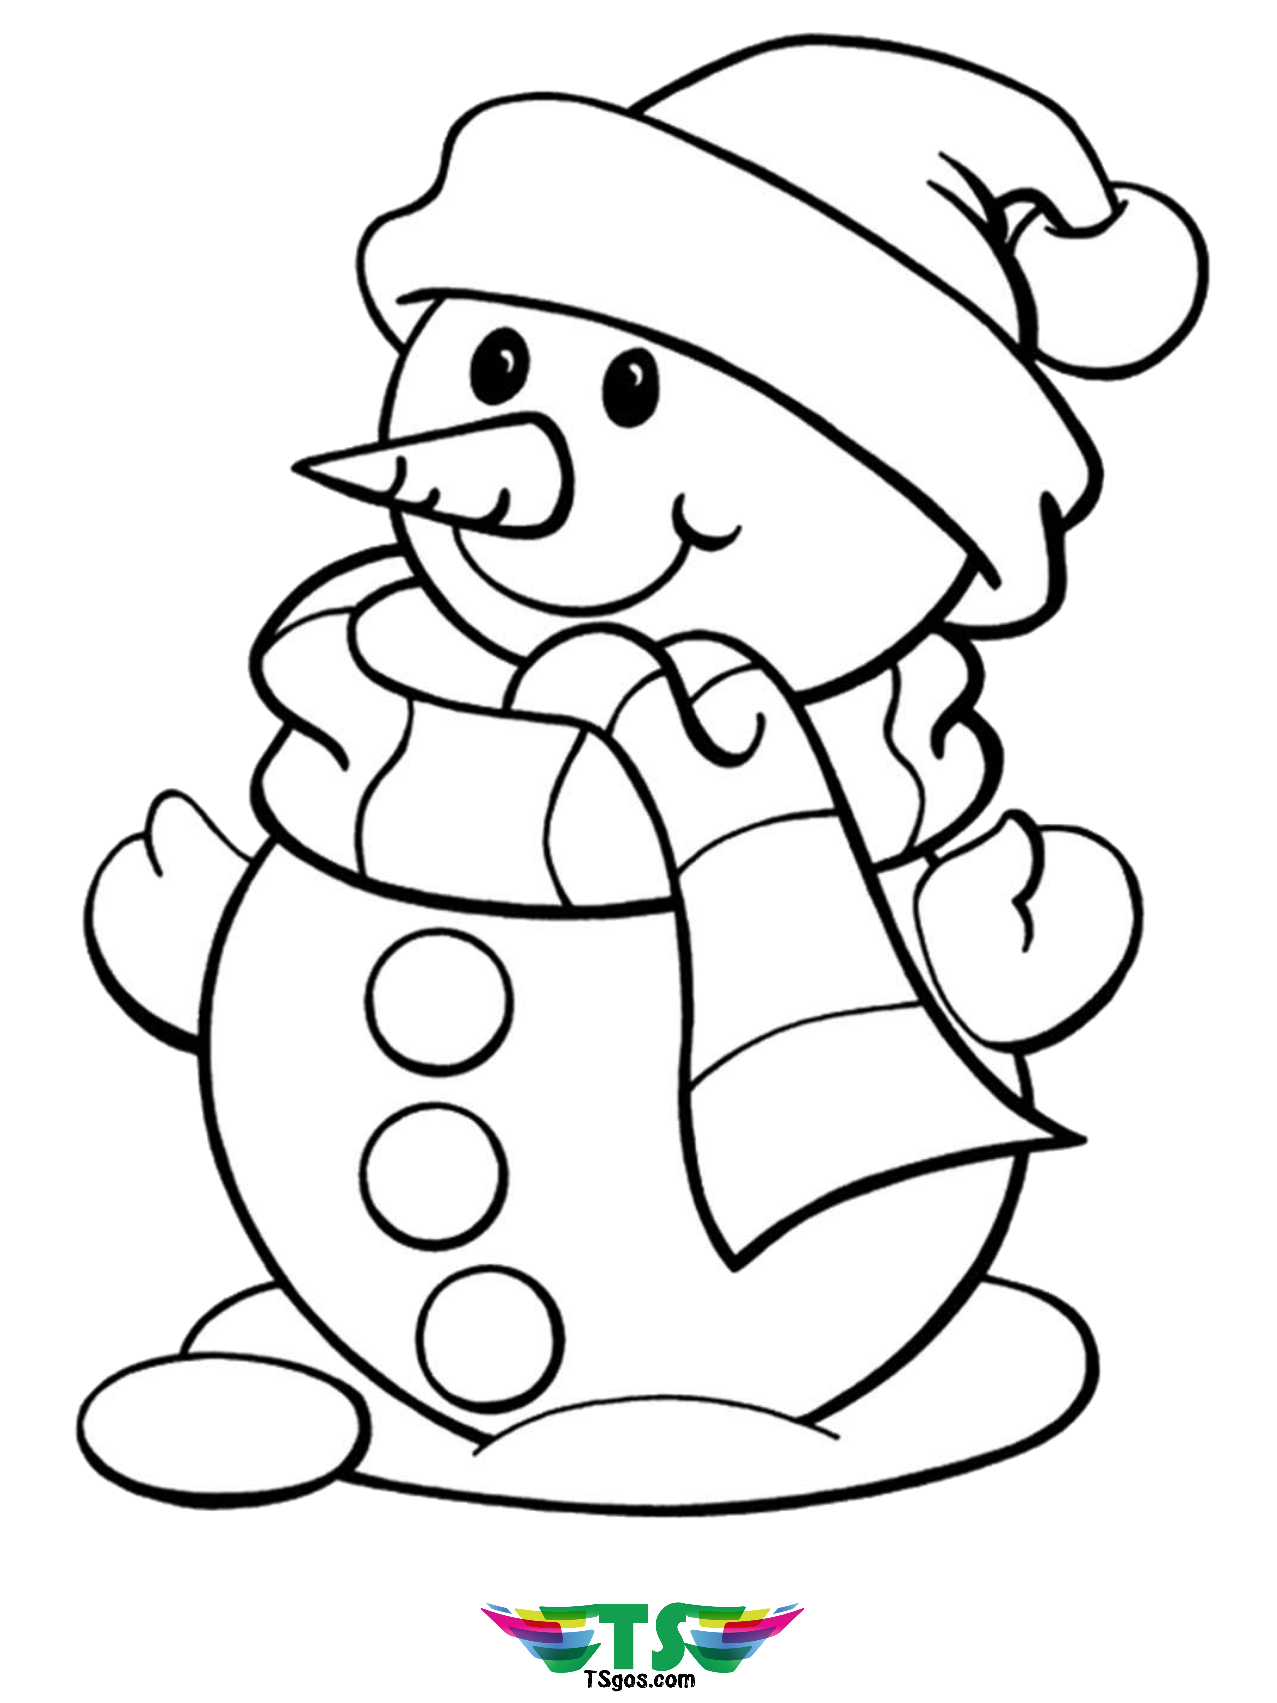 Free printable Winter snowman coloring picture.